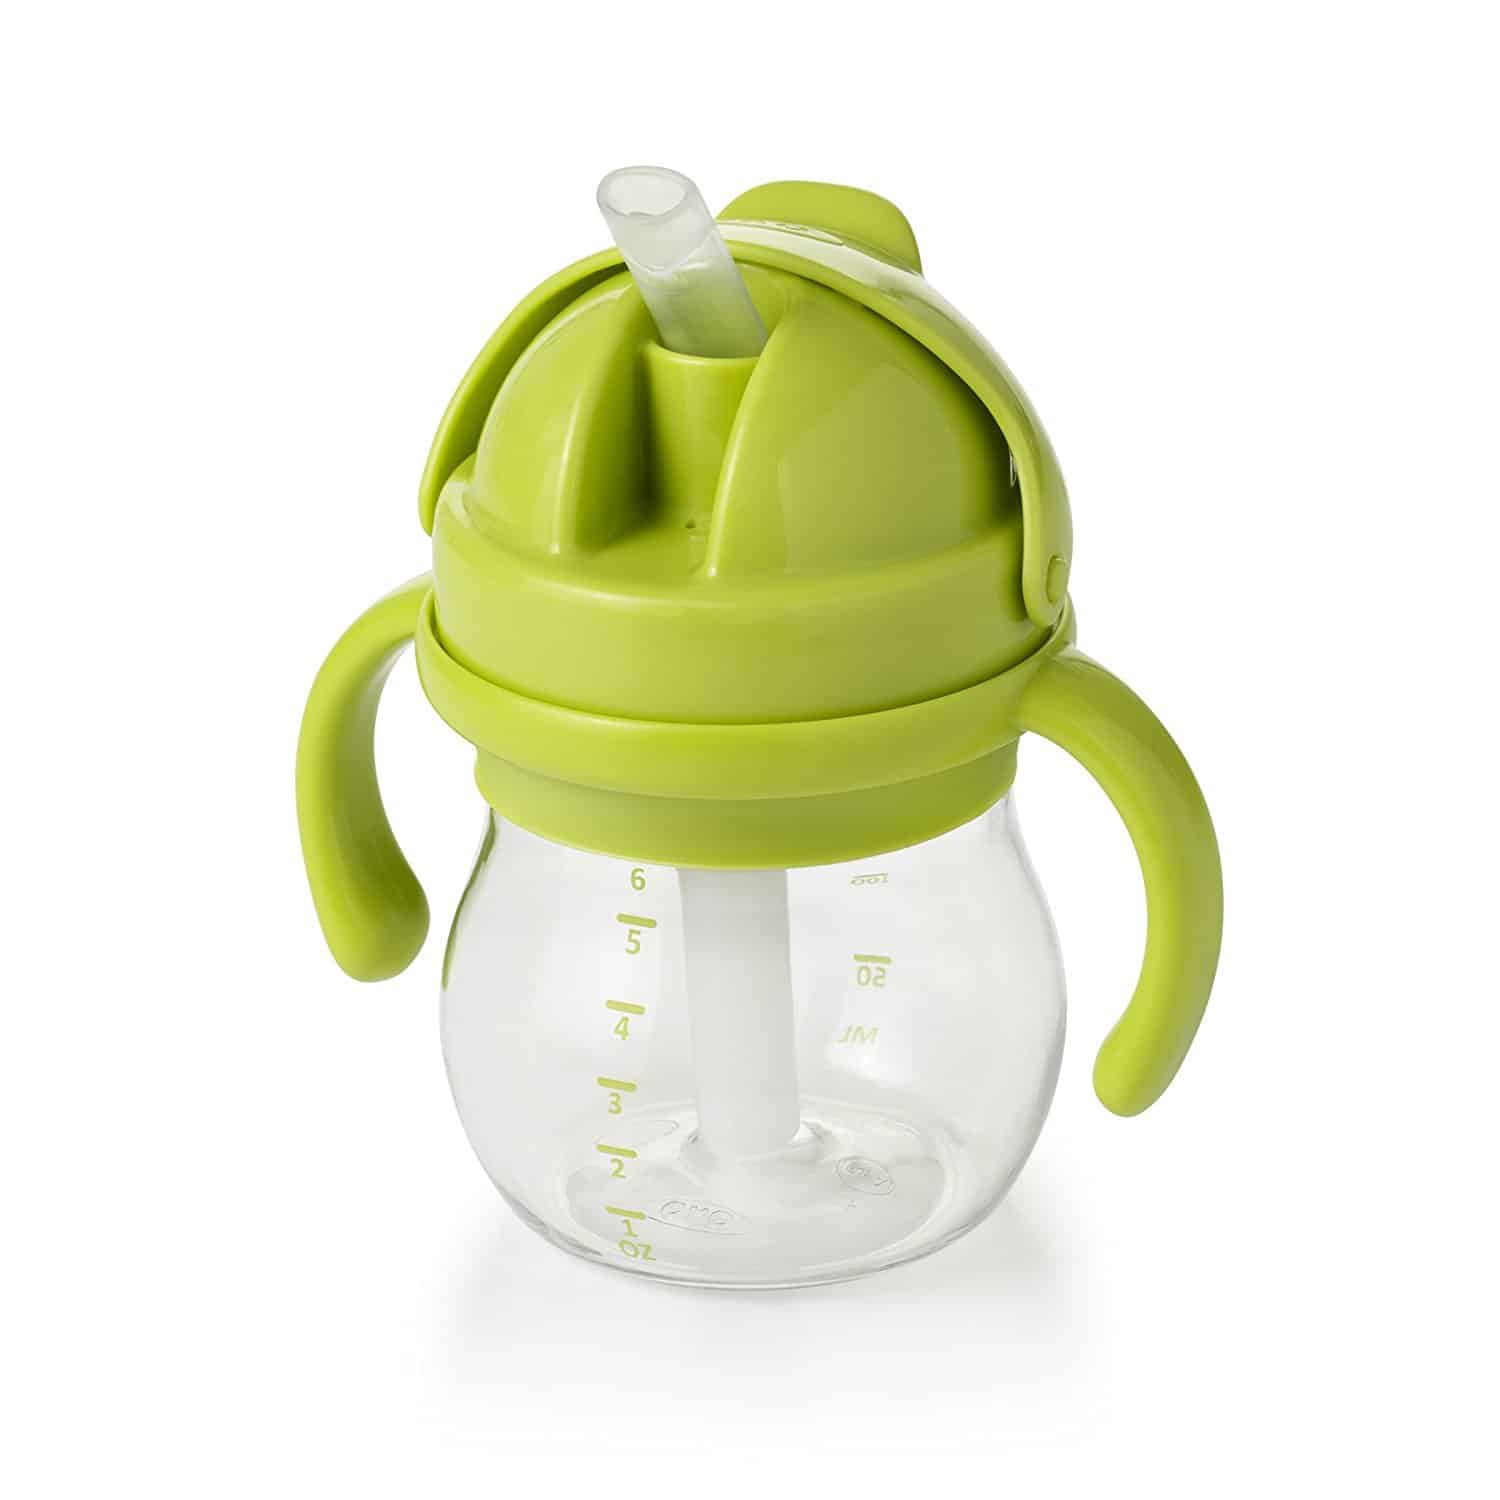 The Best Toddler Sippy Cup With a Straw